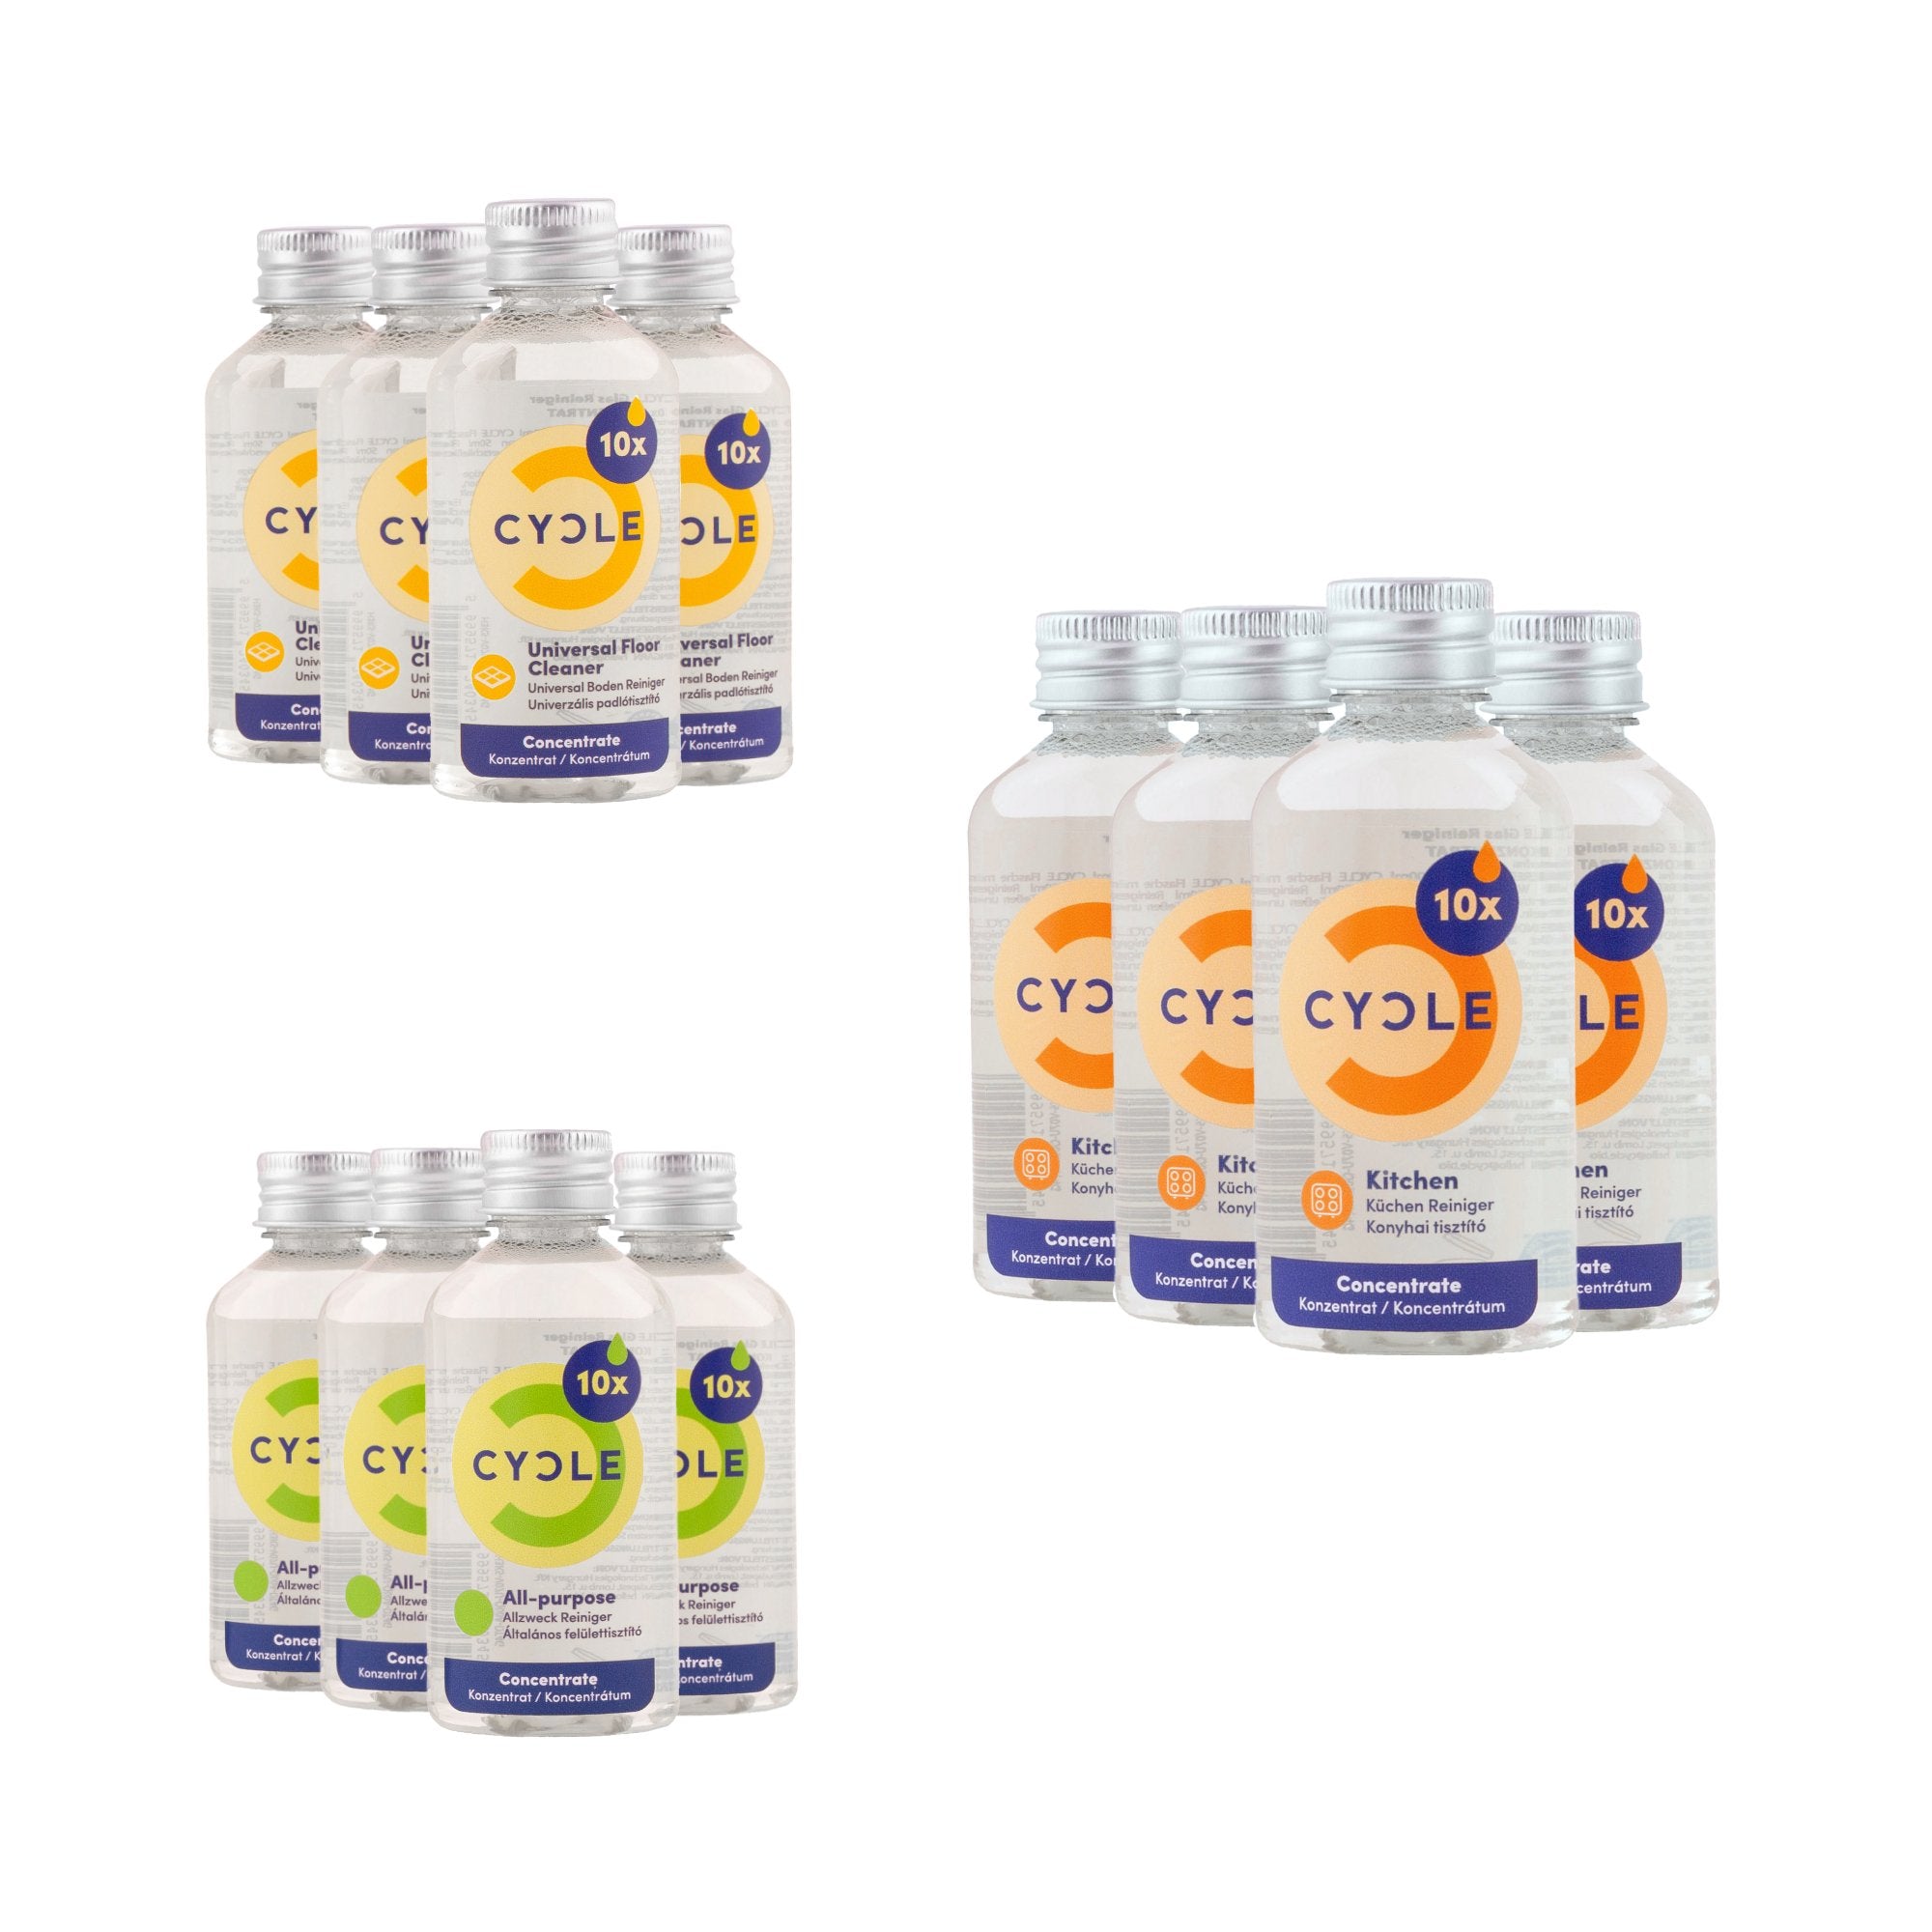 4x Home Refill Pack - CYCLE eco-friendly cleaners